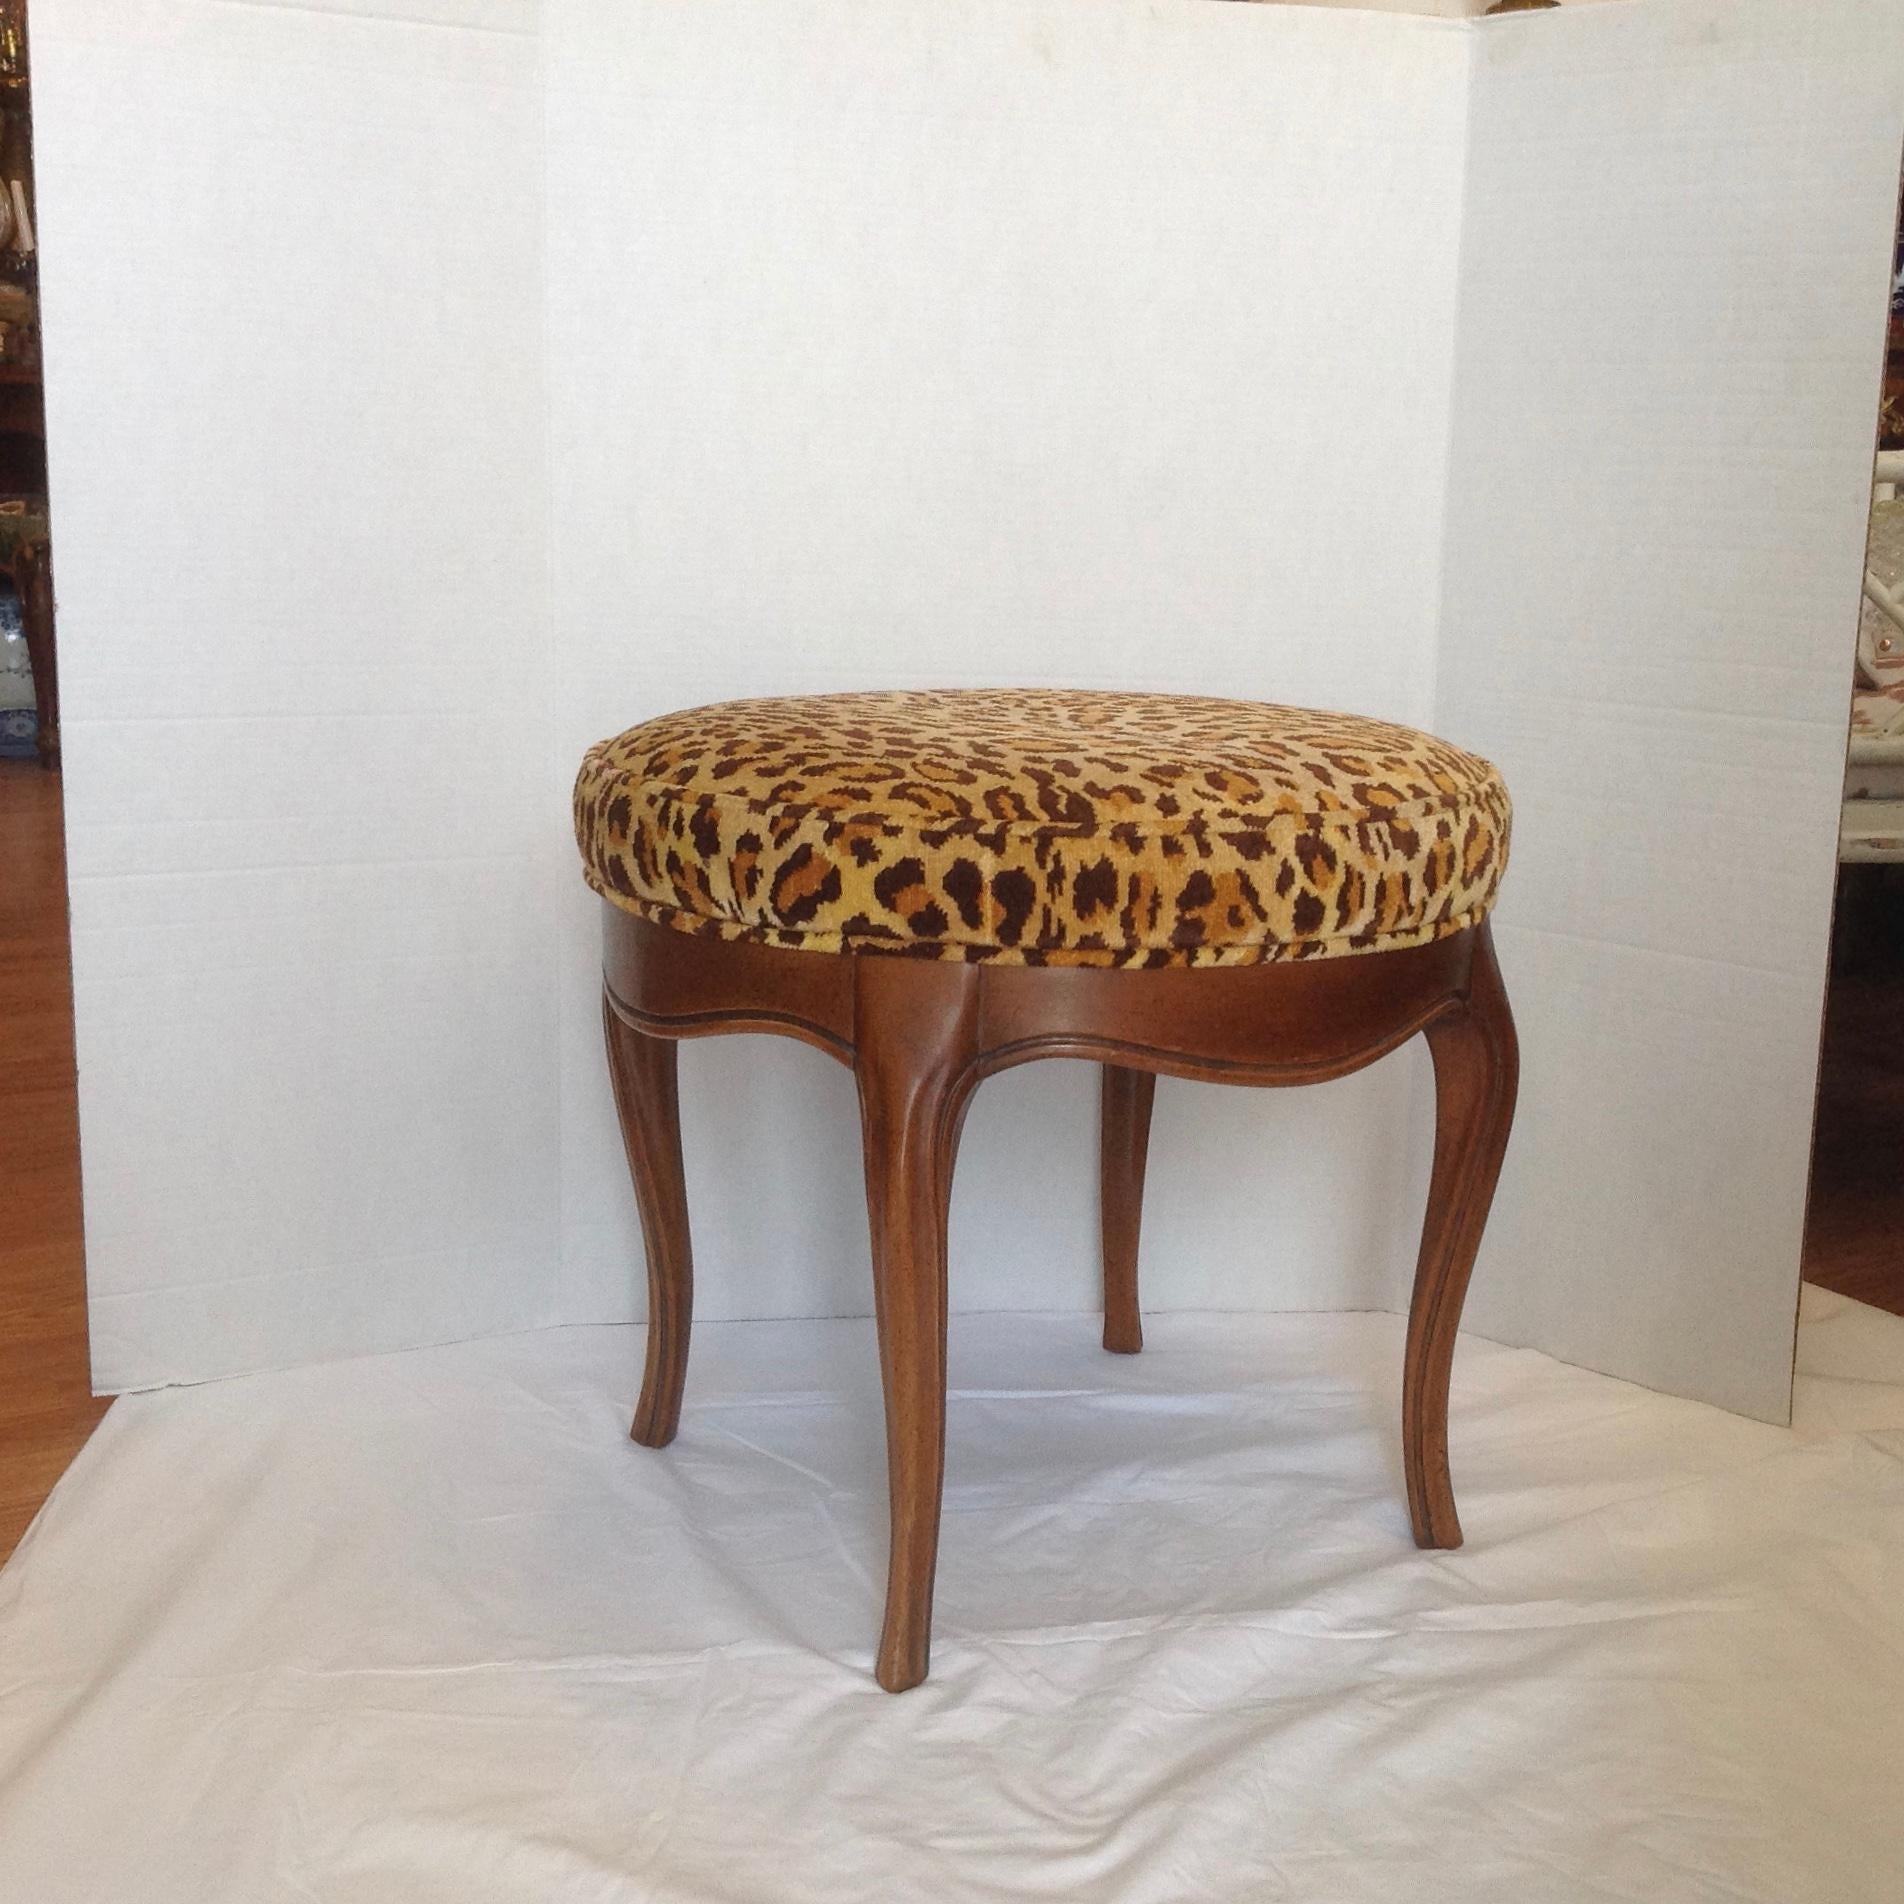 Elegantly fashioned fine Provincial style with dramatic faux leopard upholstery.